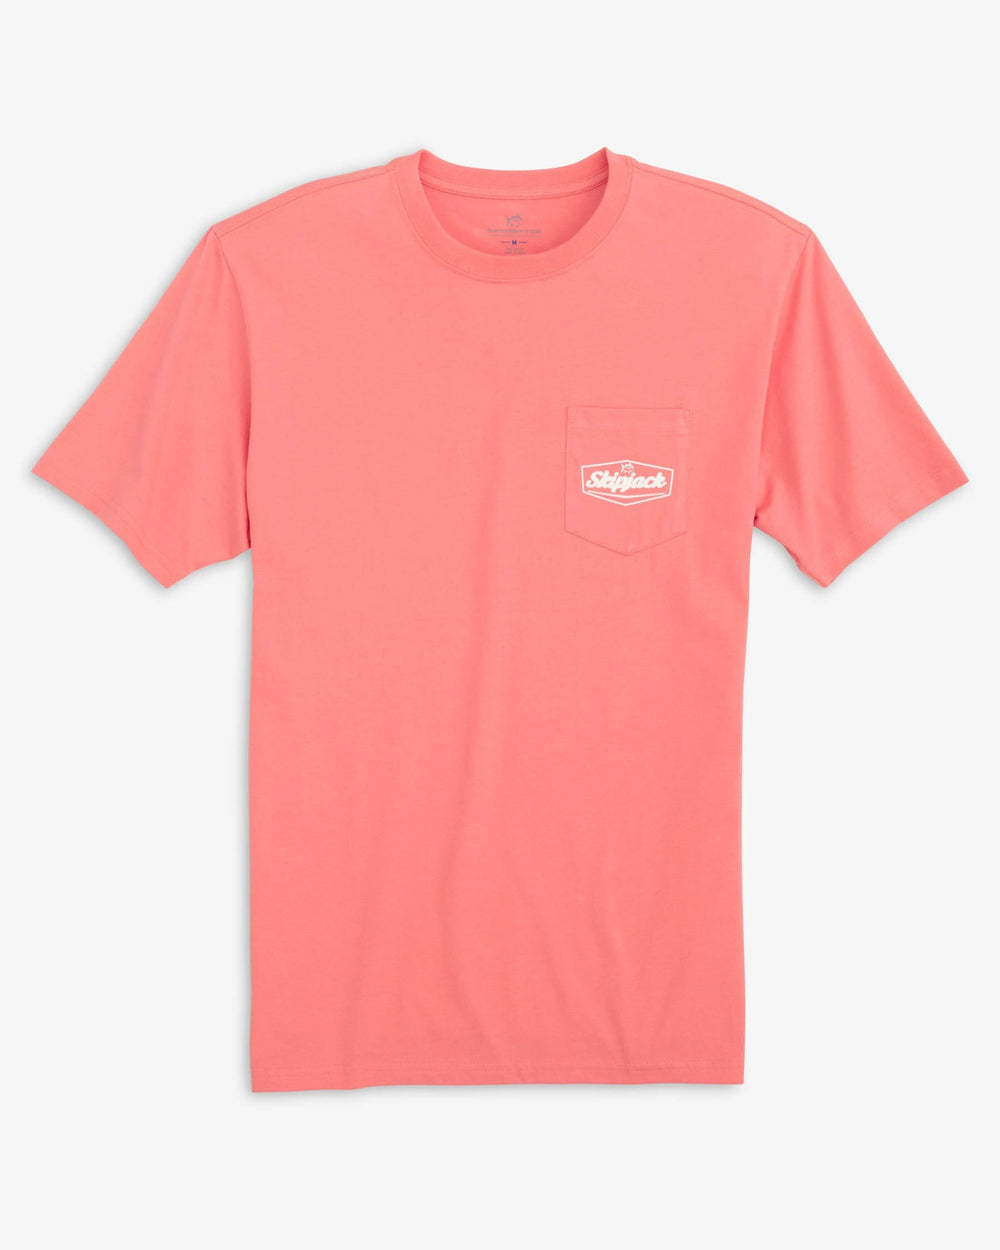 The front view of the Southern Tide Skipjack Patch T-Shirt by Southern Tide - Sunkist Coral